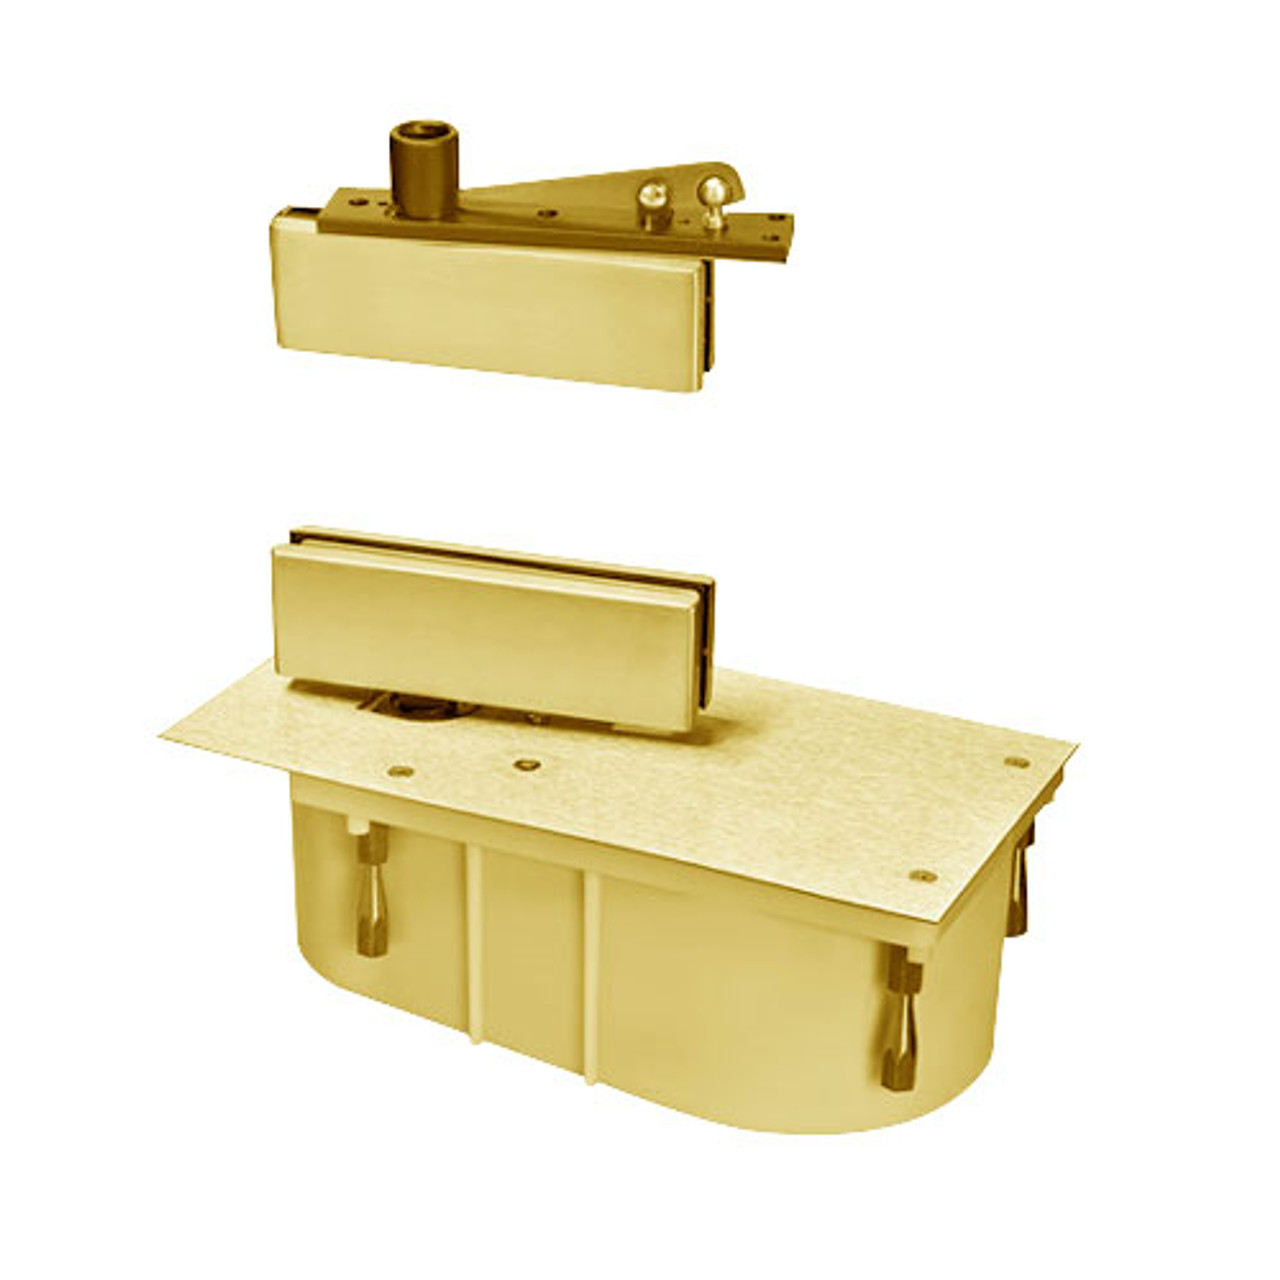 428-90S-LFP-RH-605 Rixson 428 Series Heavy Duty Single Acting Center Hung Floor Closer with Patch Fittings in Bright Brass Finish